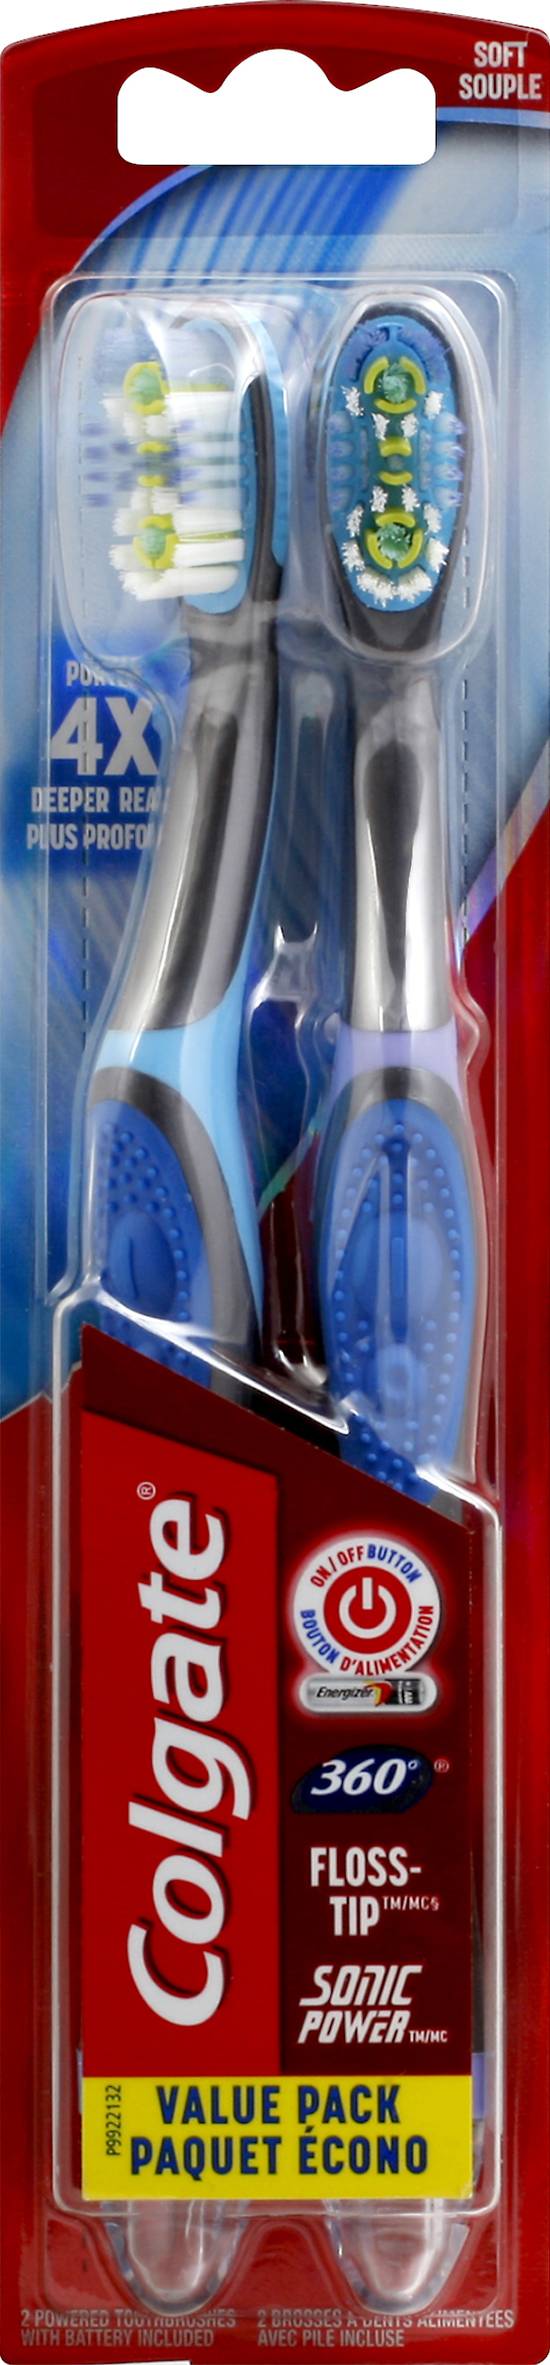 Colgate Floss-Tip Sonic Power Soft Toothbrush (2 toothbrushes)